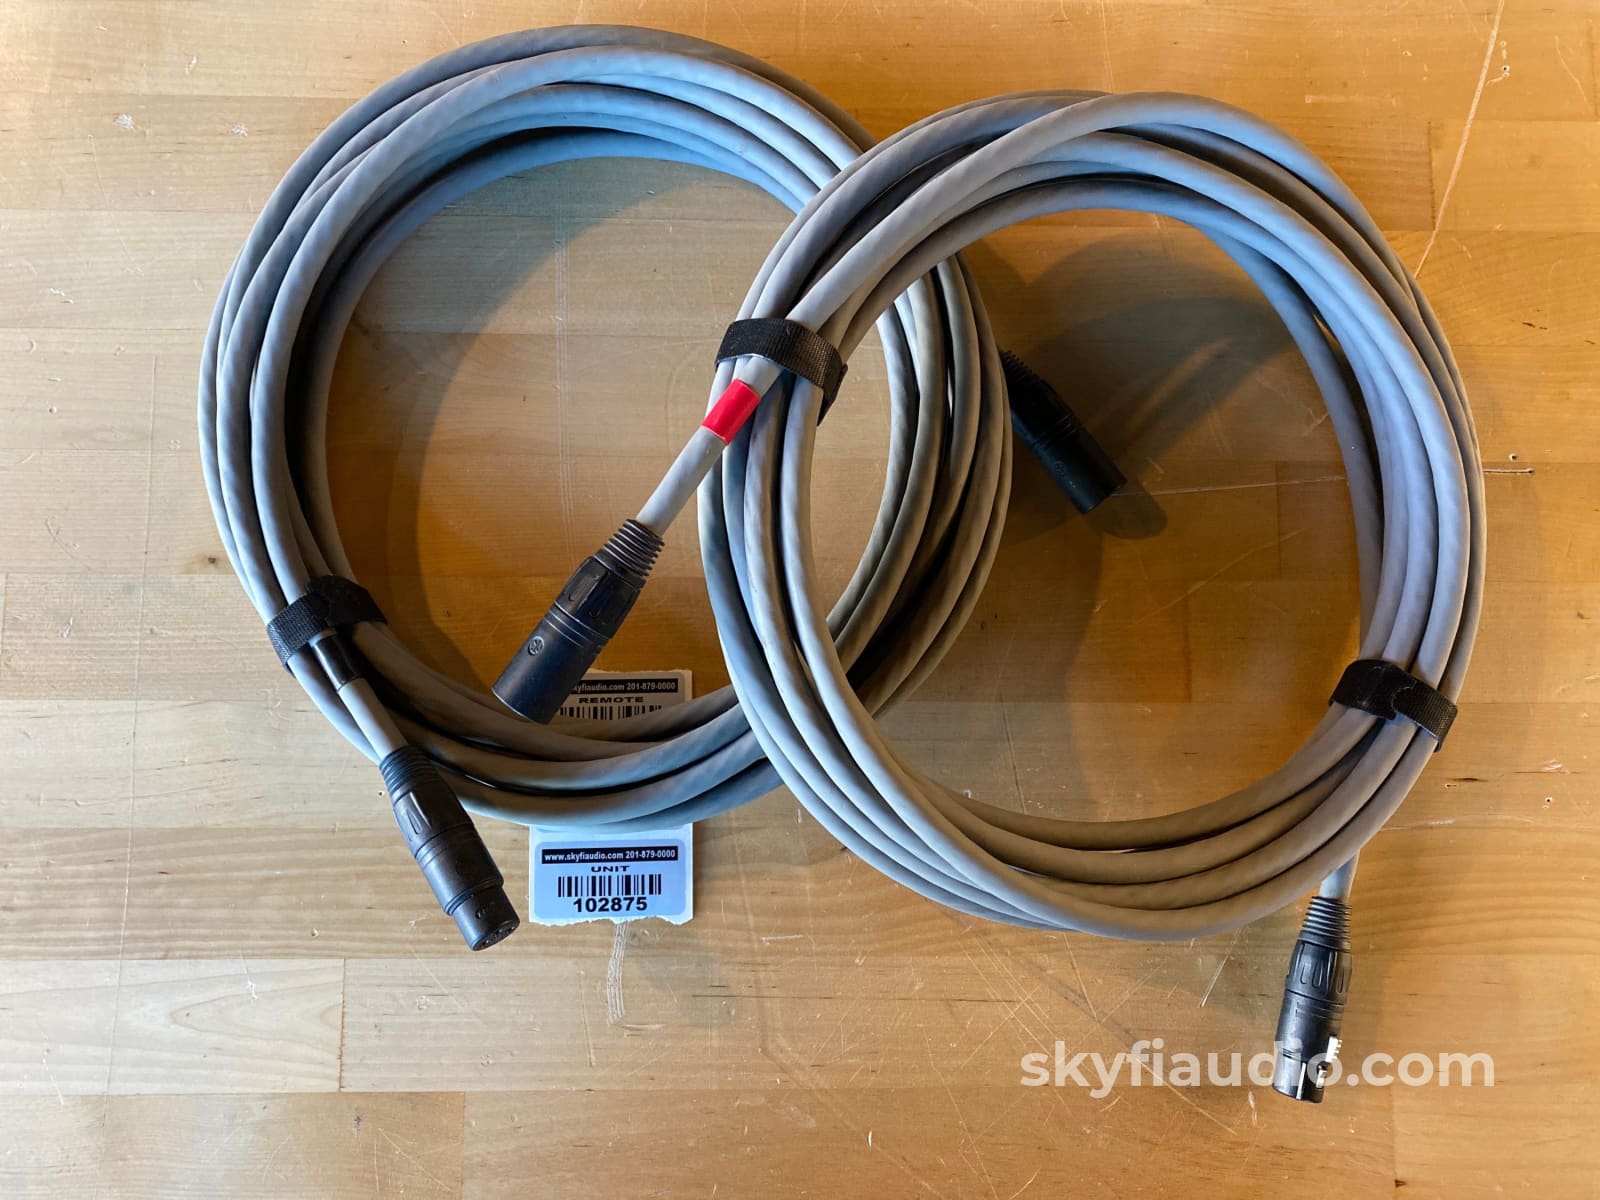 Audio Research - Vintage Xlr Interconnects (Pair) Approx 30Ft. Cables